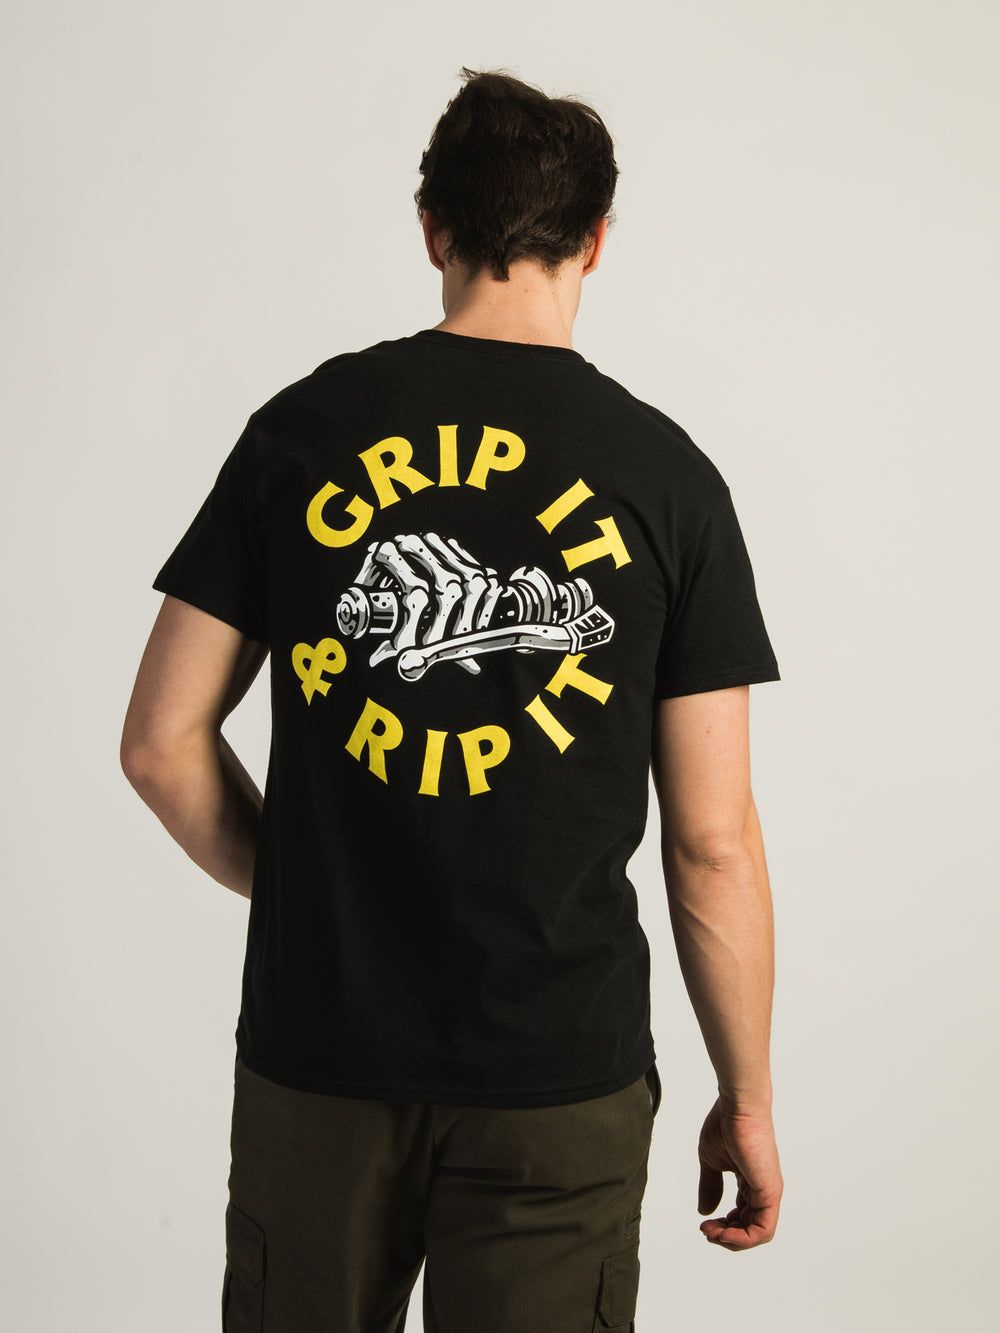 LAST CALL GRIP IT AND RIP IT T-SHIRT